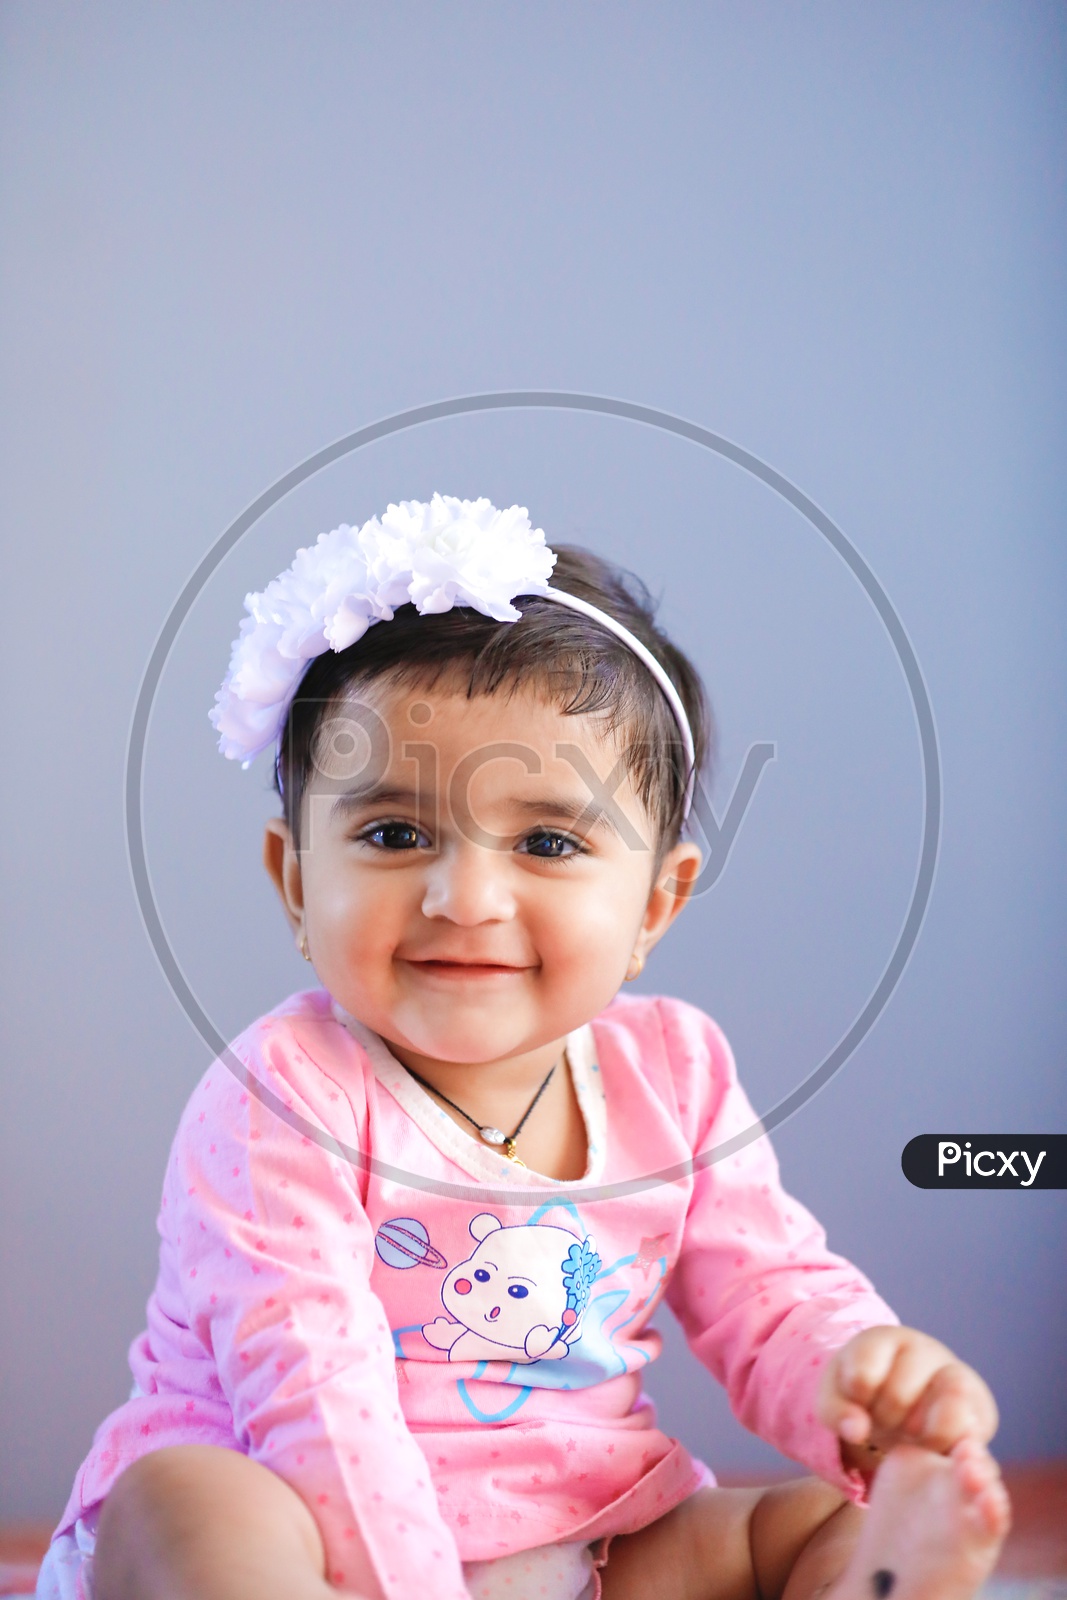 Cute Indian Baby Girl With Smiling Face On an Isolated White Background